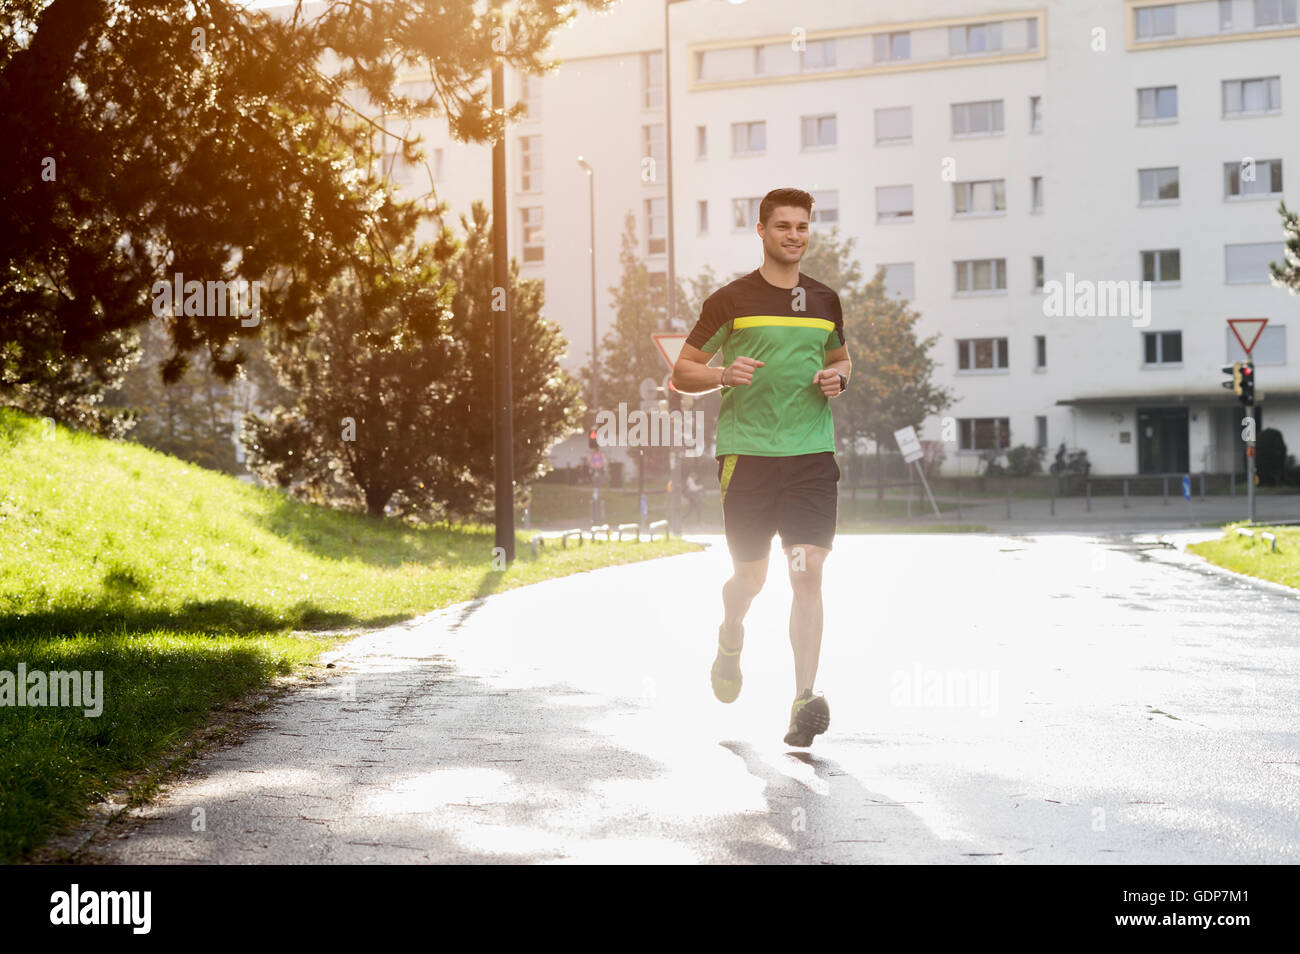 Young athlete jogging in park Stock Photo